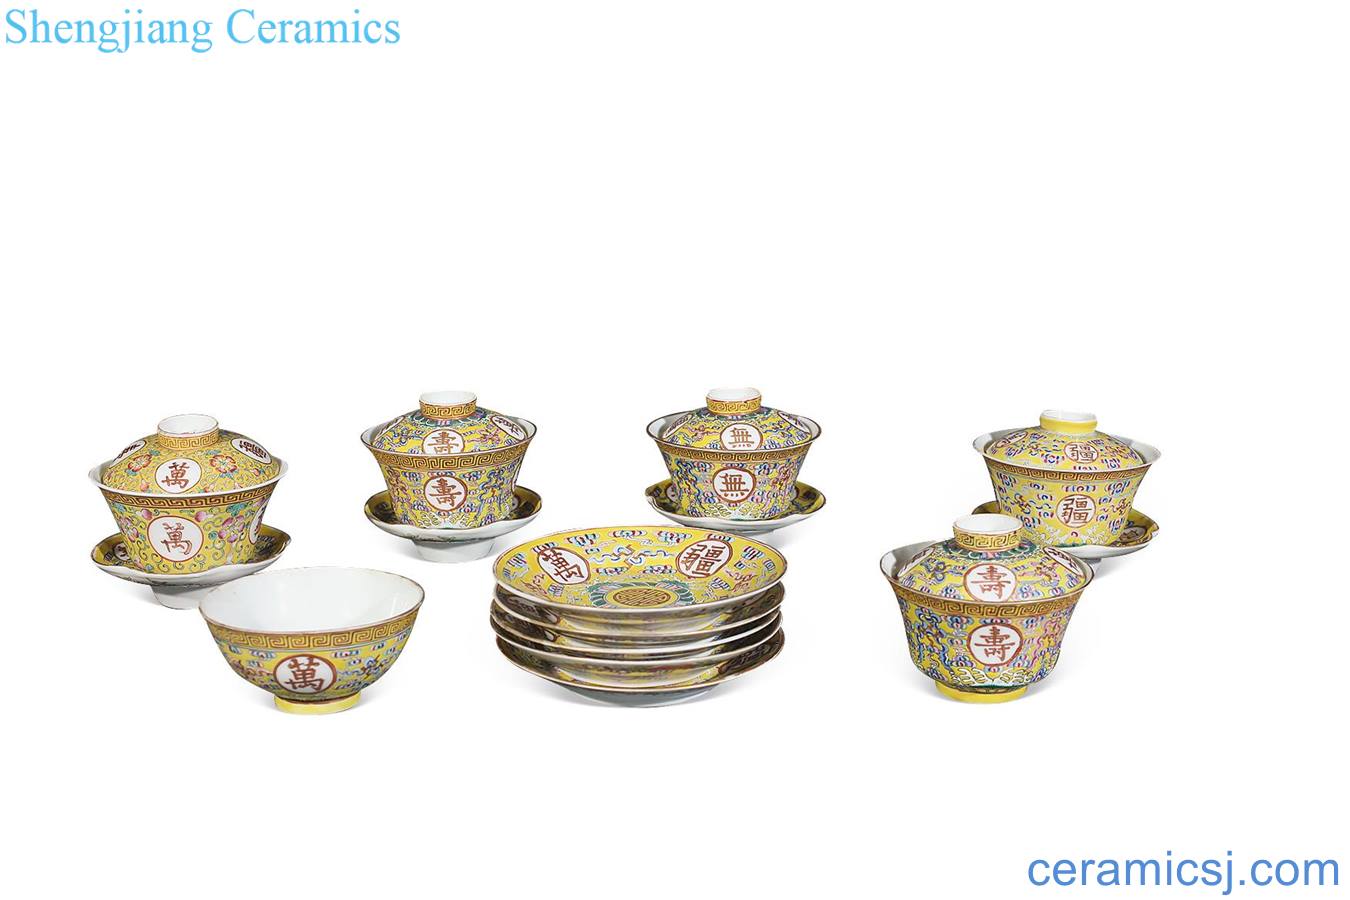 Pastel reign of qing emperor guangxu stays covered bowl, bowl (group a)